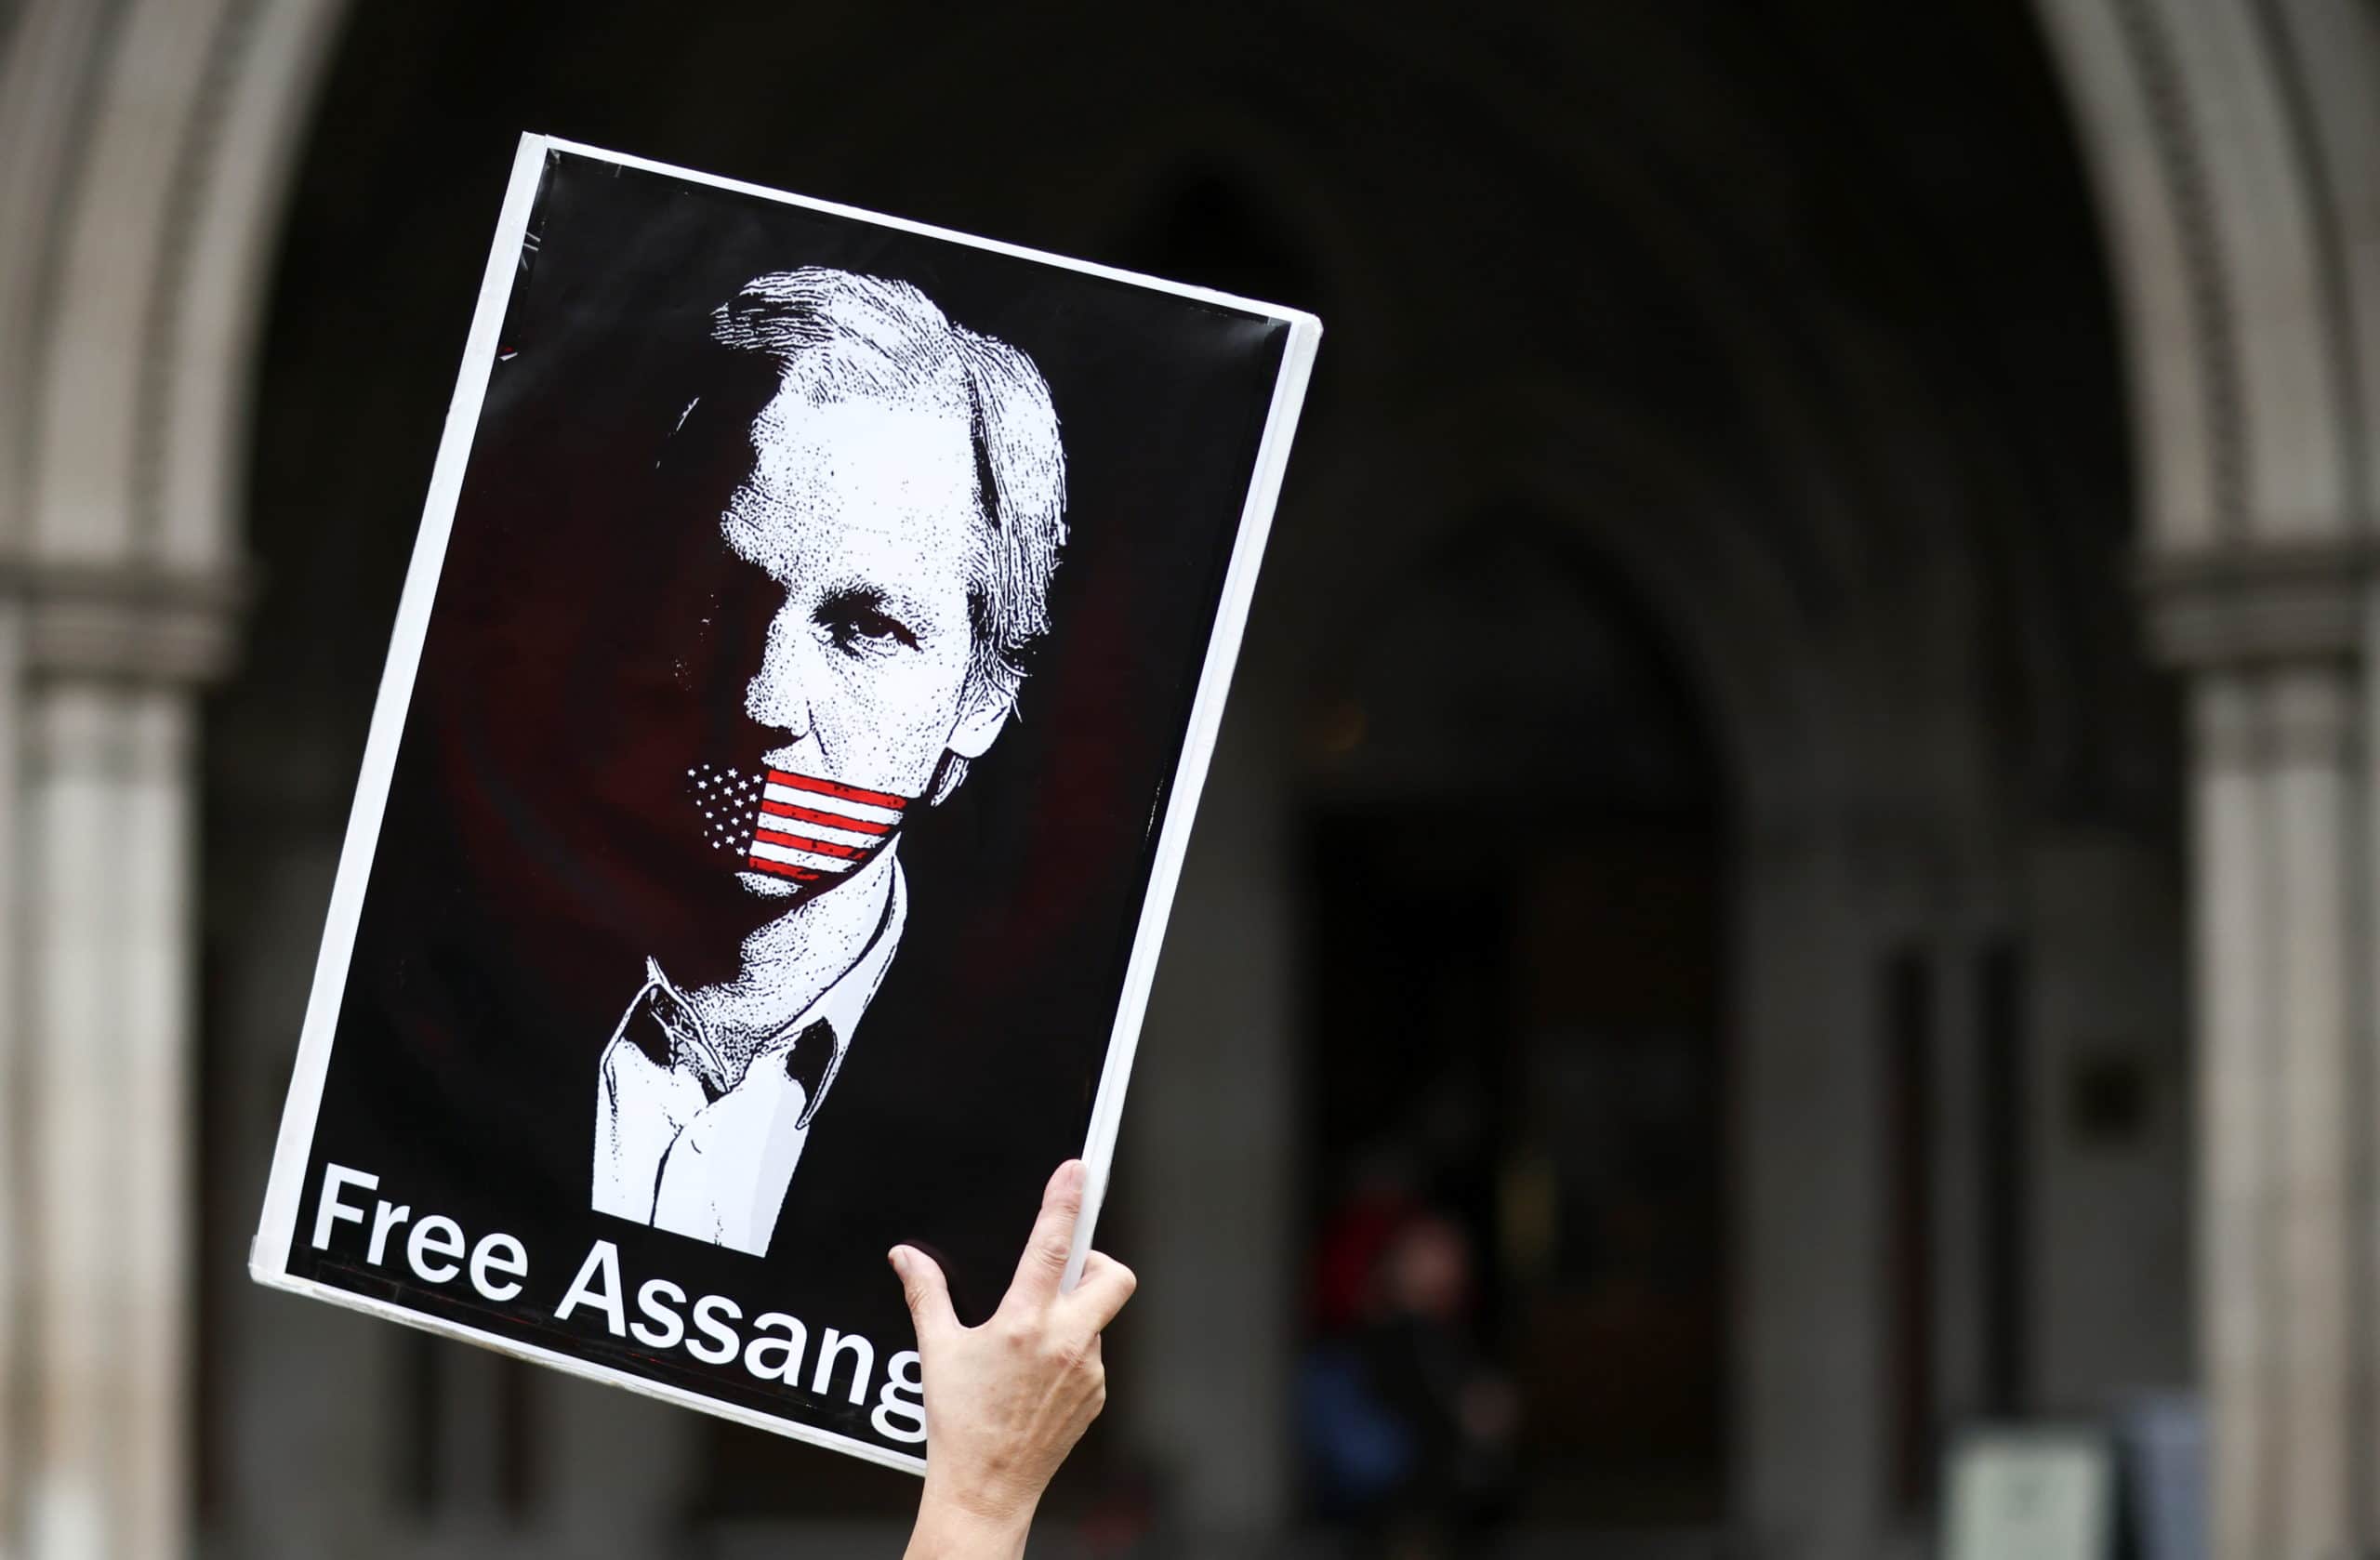 A supporter of Wikileaks founder Julian Assange protests outside the Royal Courts of Justice in London, Britain, October 27, 2021. Photo: Reuters/Henry Nicholls.